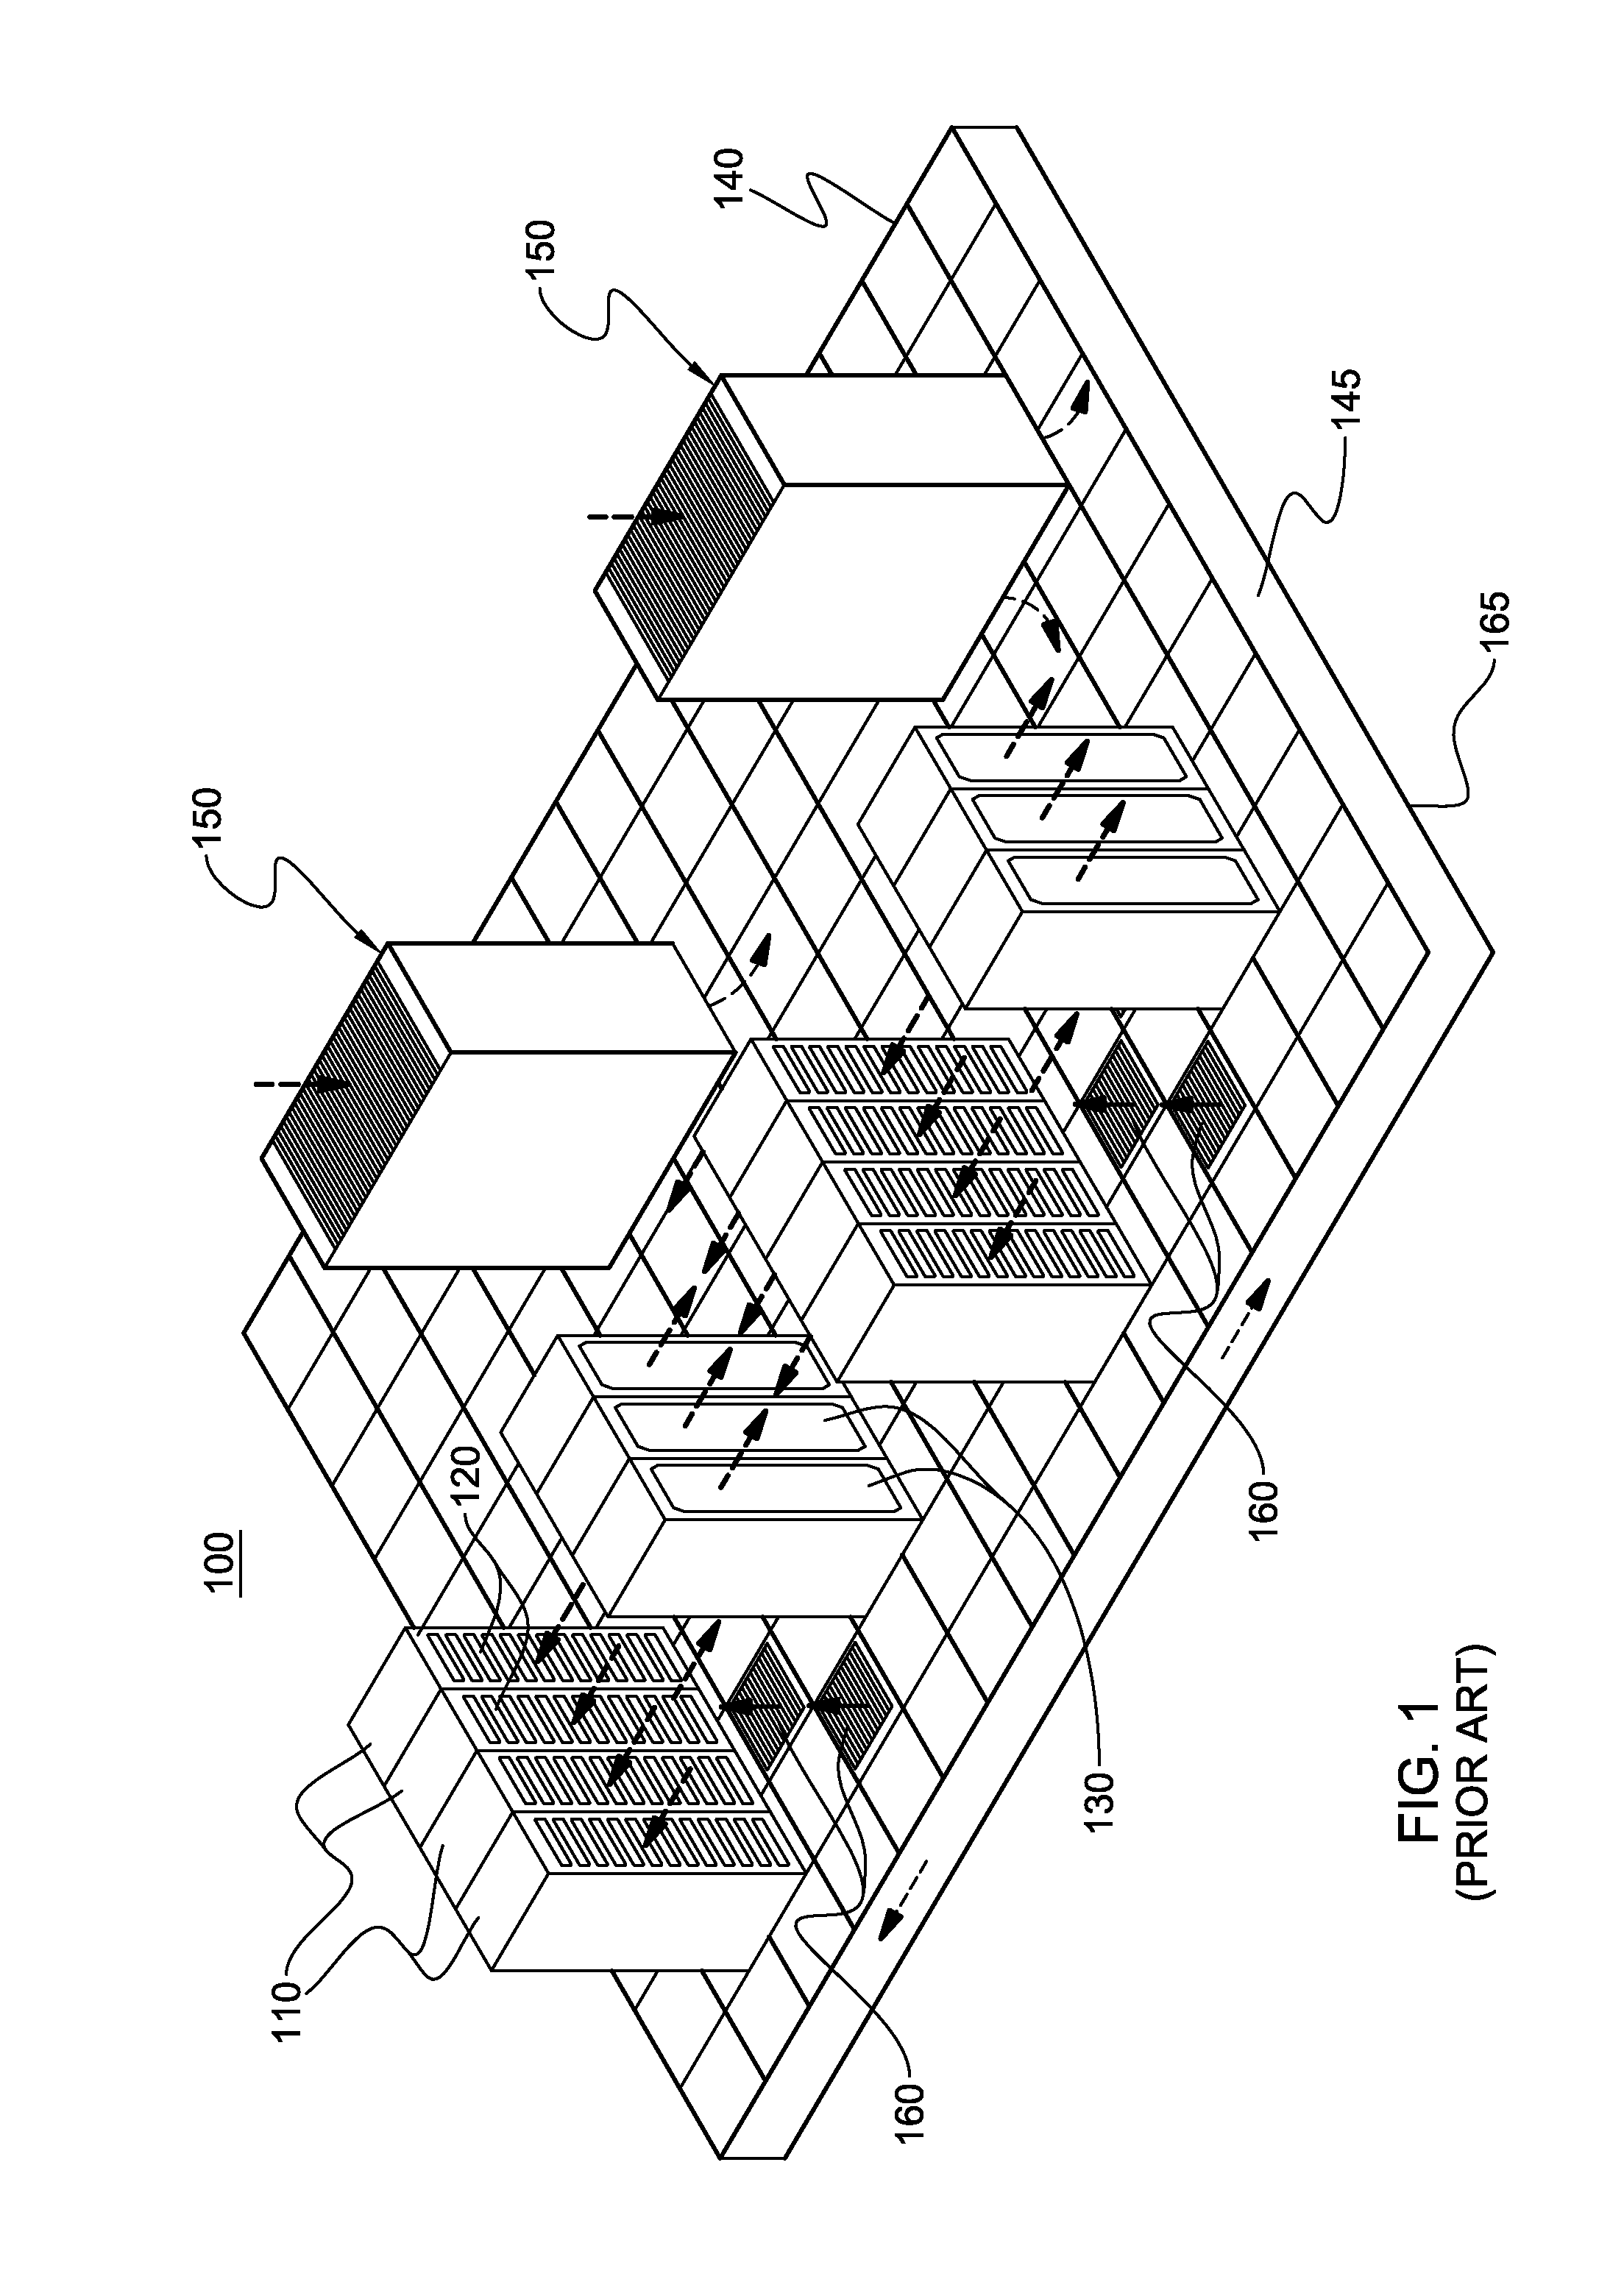 Immersion-cooled and conduction-cooled method for electronic system